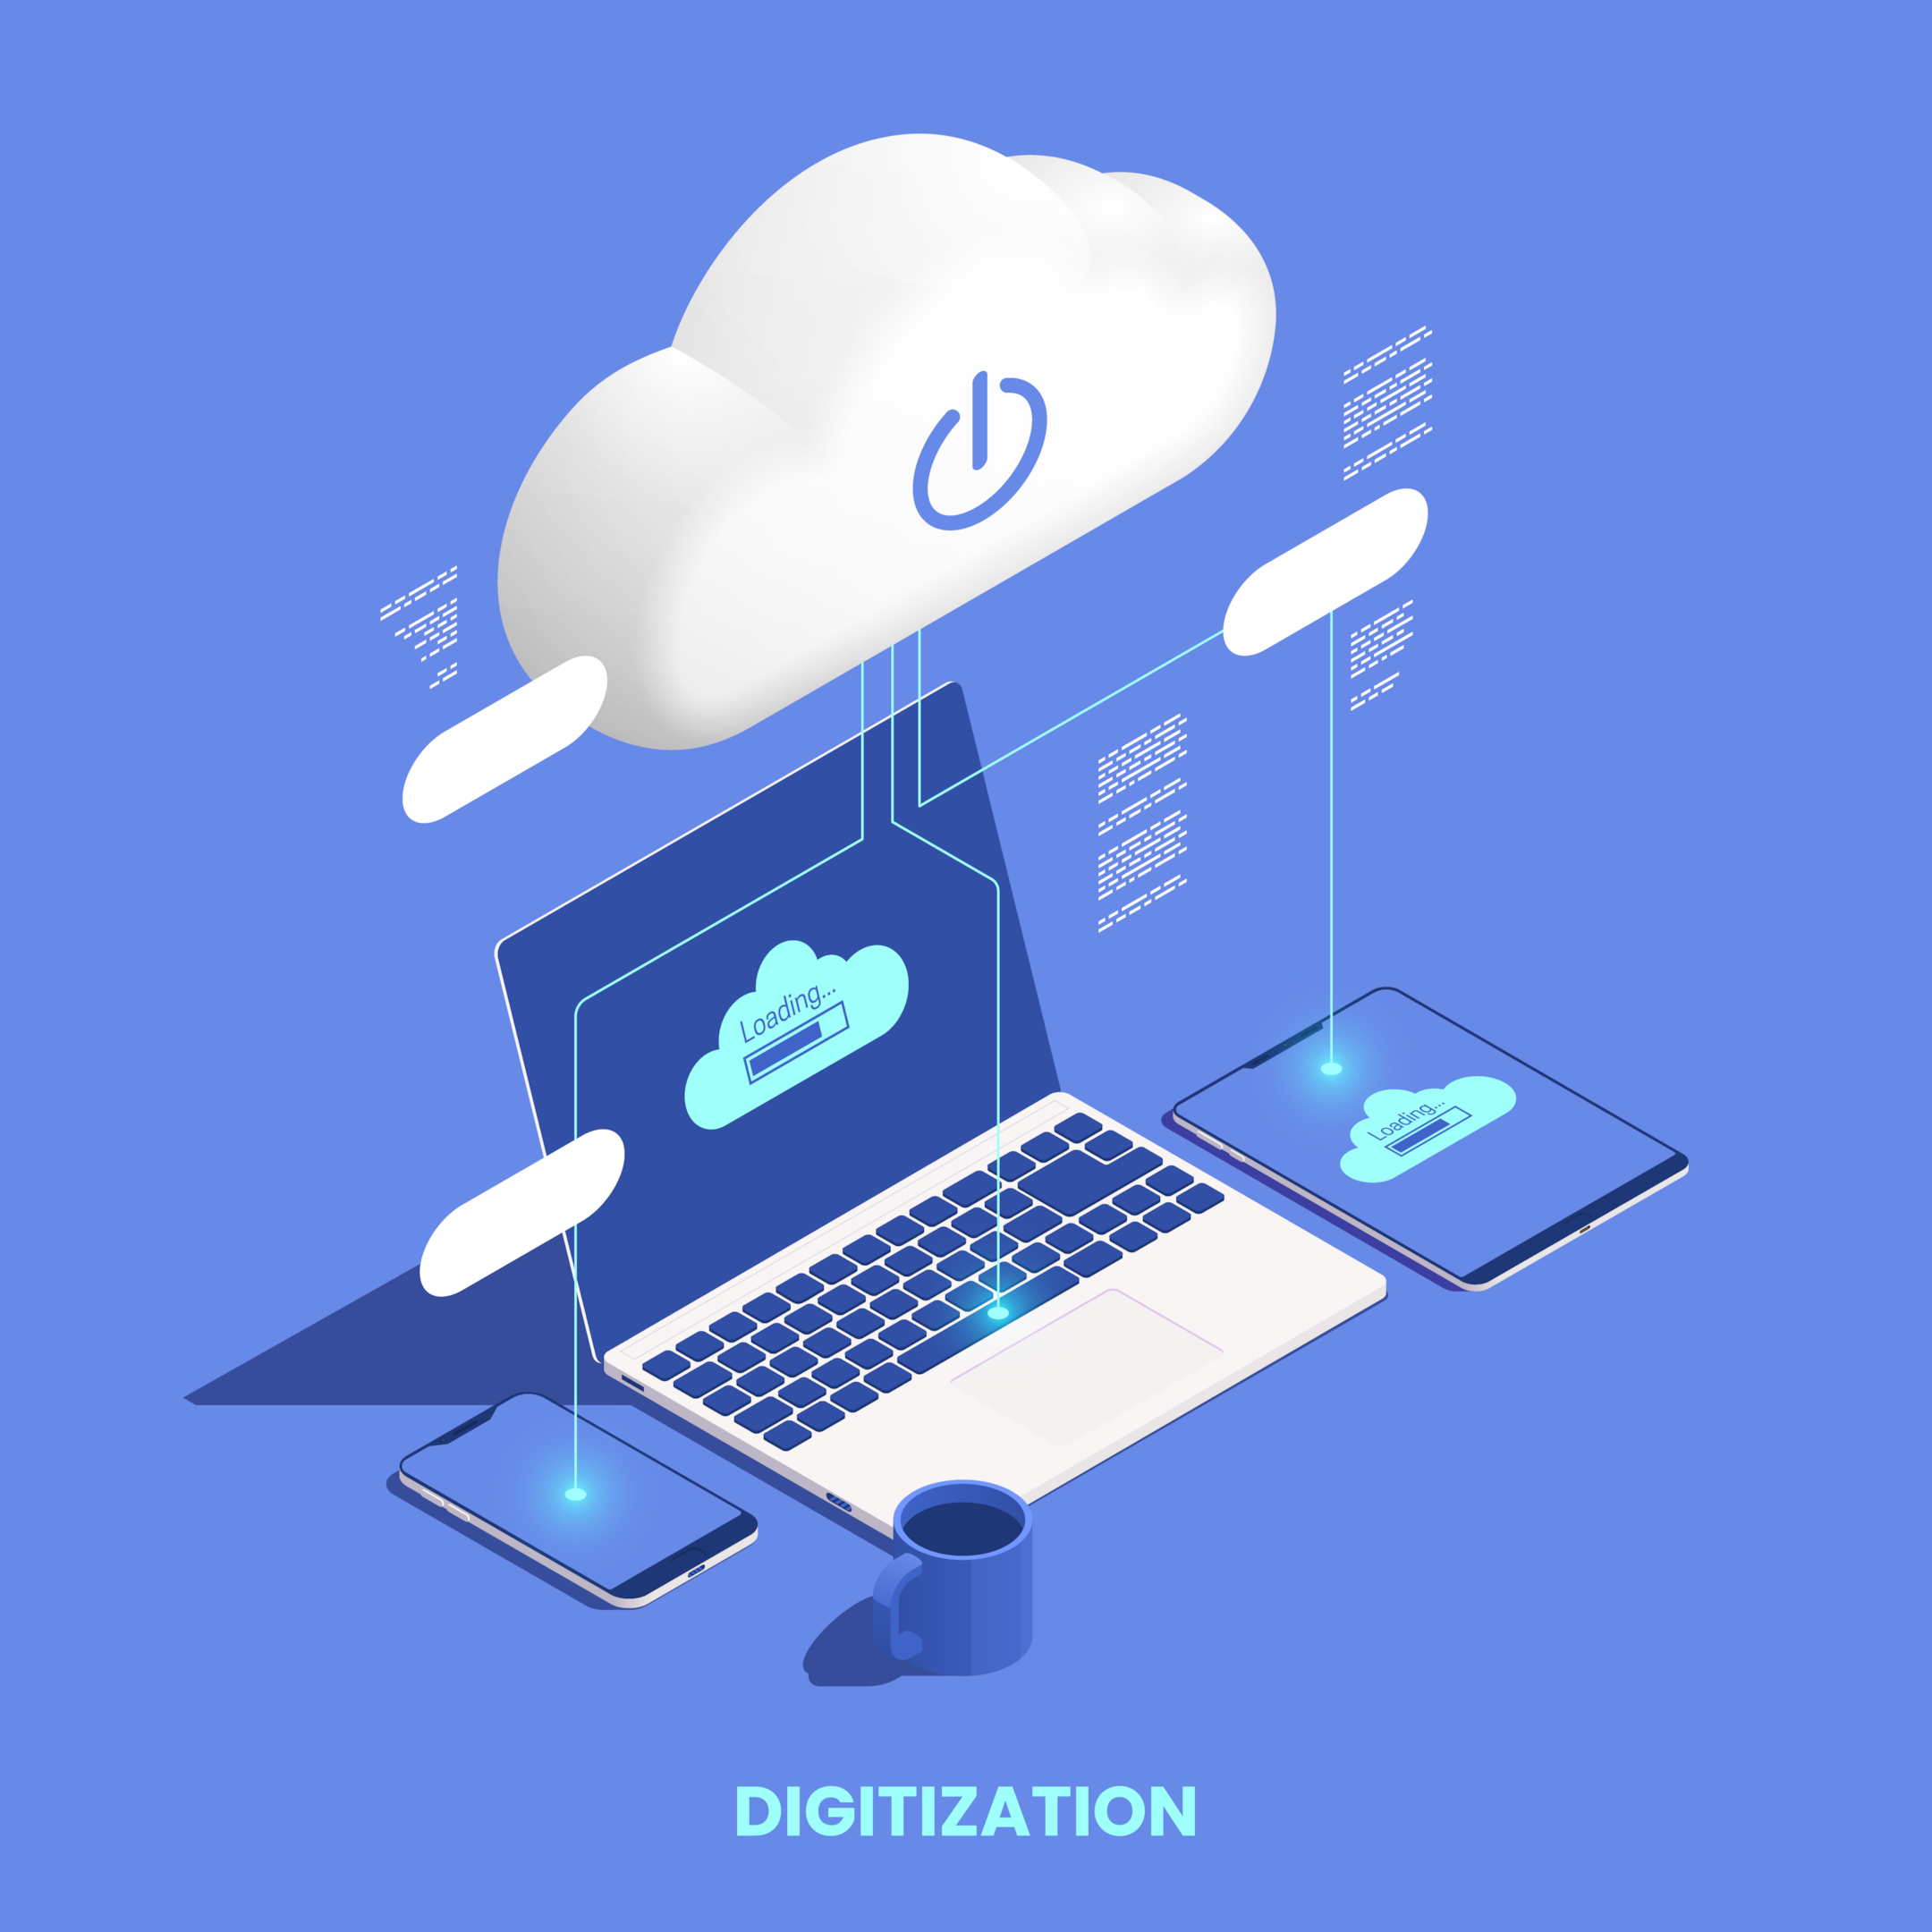 An illustration symbolizing the adoption of cloud apps, showcasing a seamless integration and interaction between various cloud-based applications.